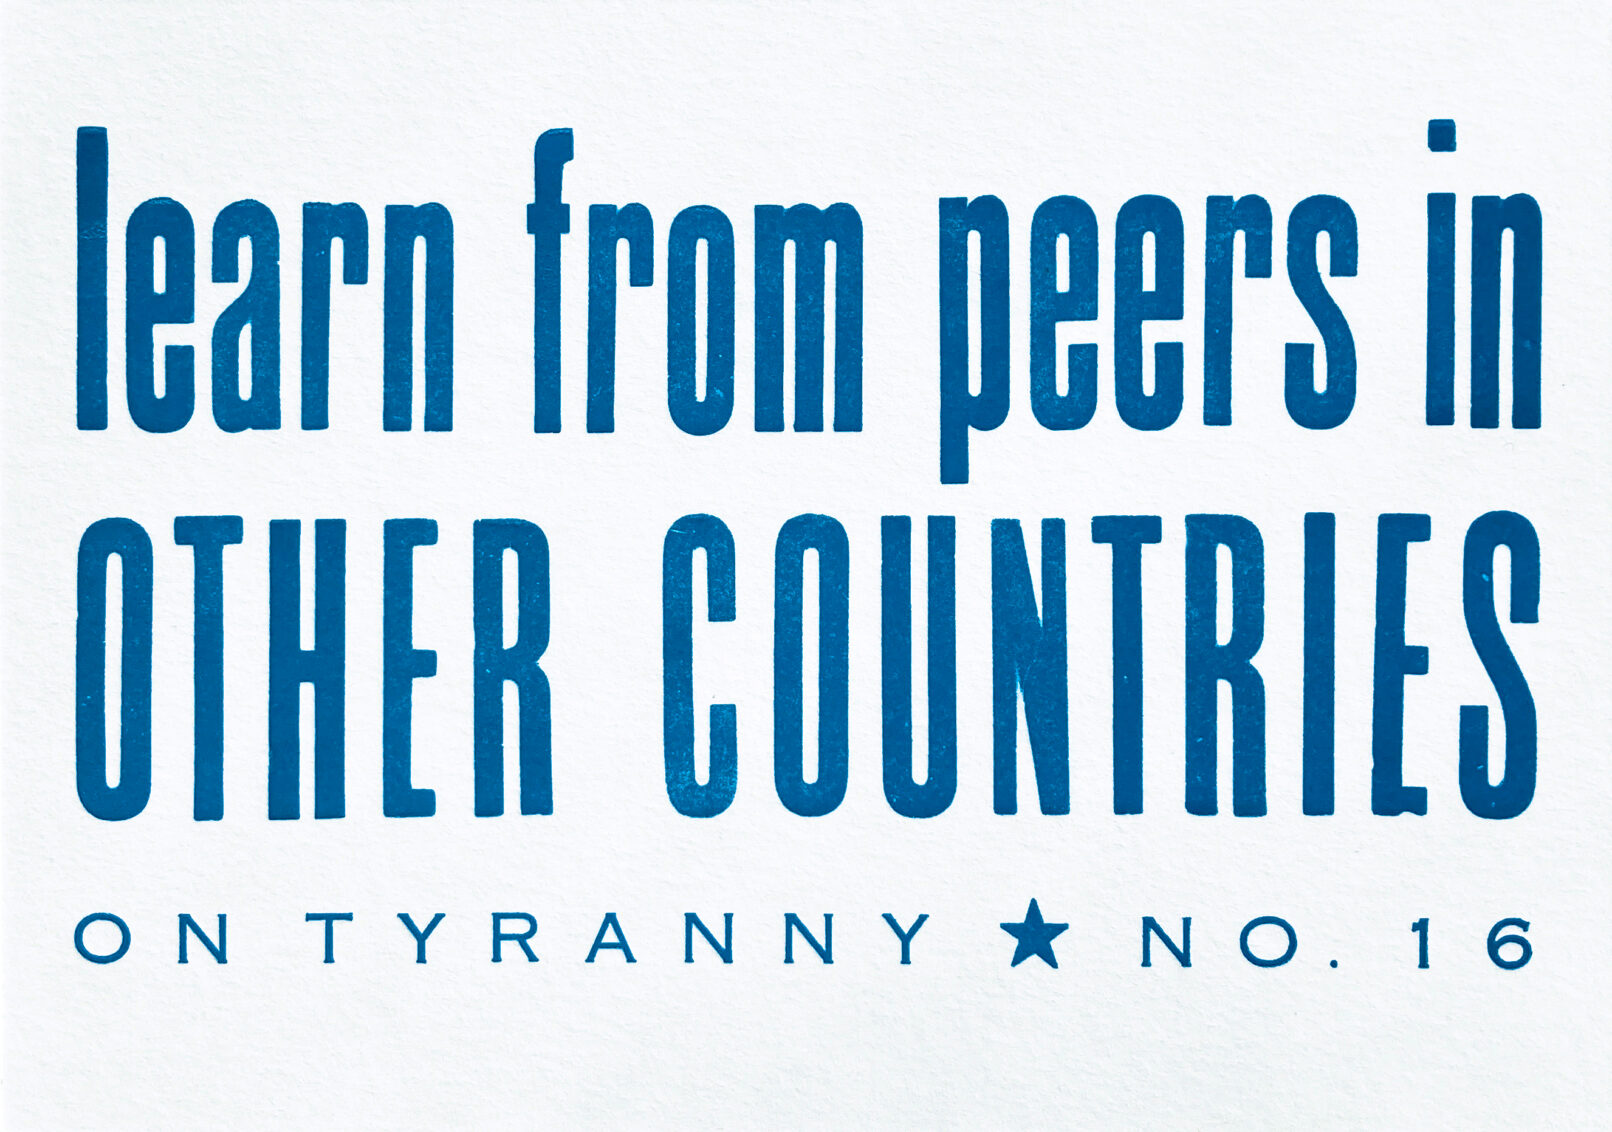 Letterpress print in blue ink on white paper with text that reads "learn from peers in OTHER COUNTRIES On Tyranny No. 16"